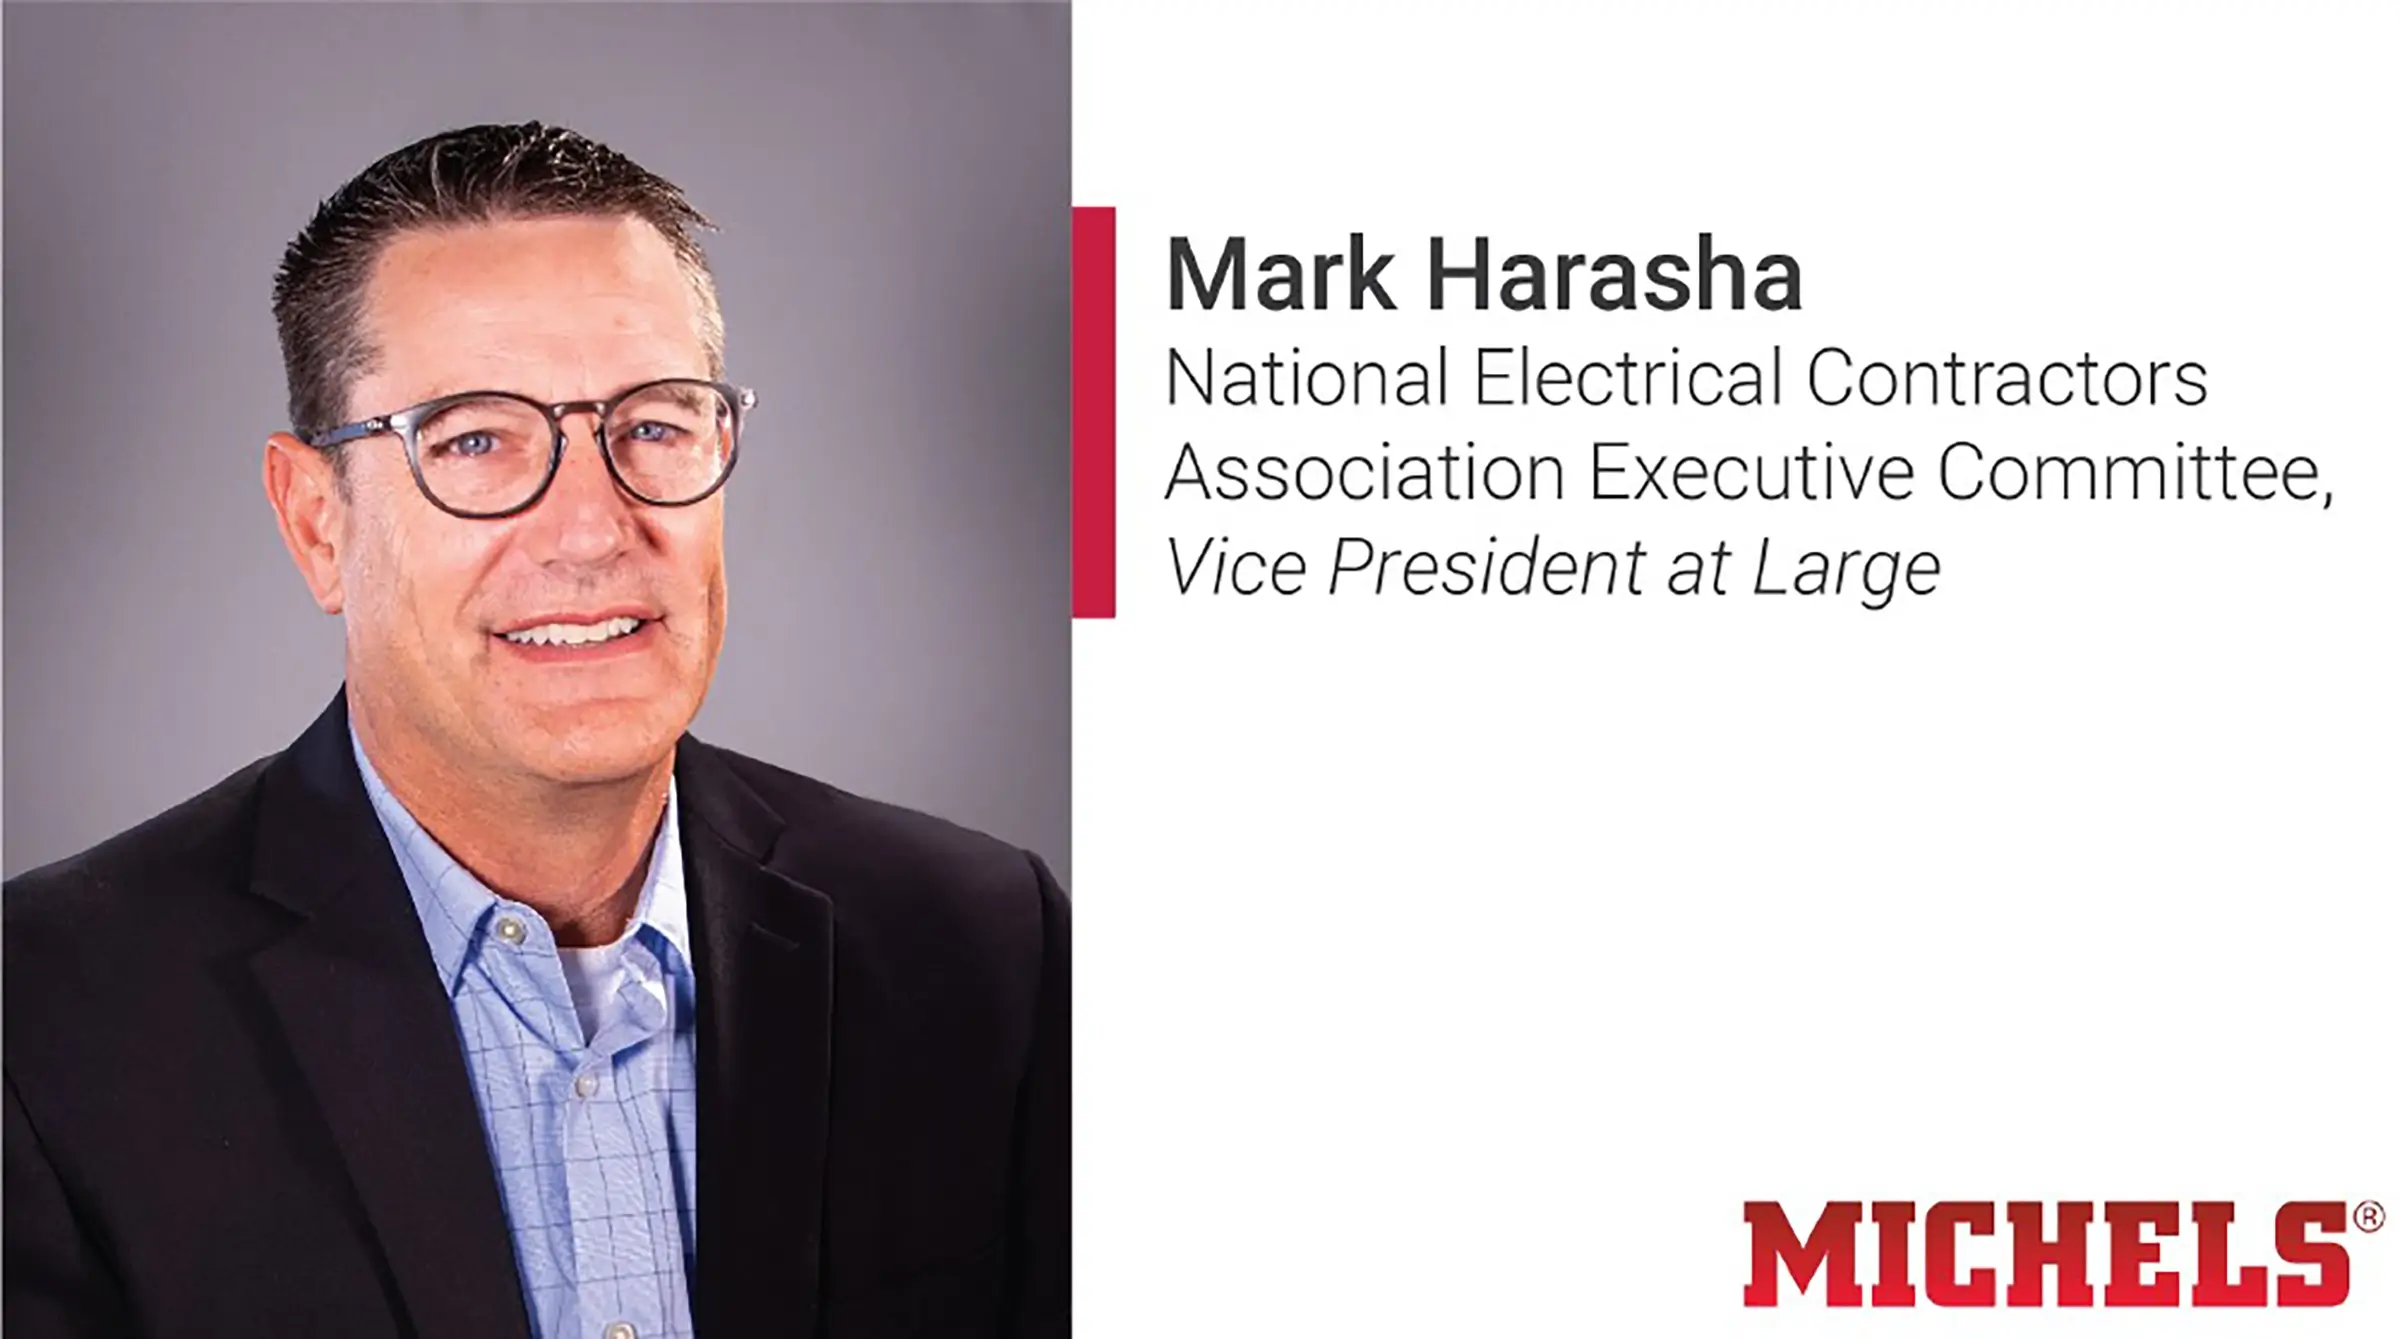 Mark Harasha - National Electrical Contractors Association Executive Committee Vice President at Large